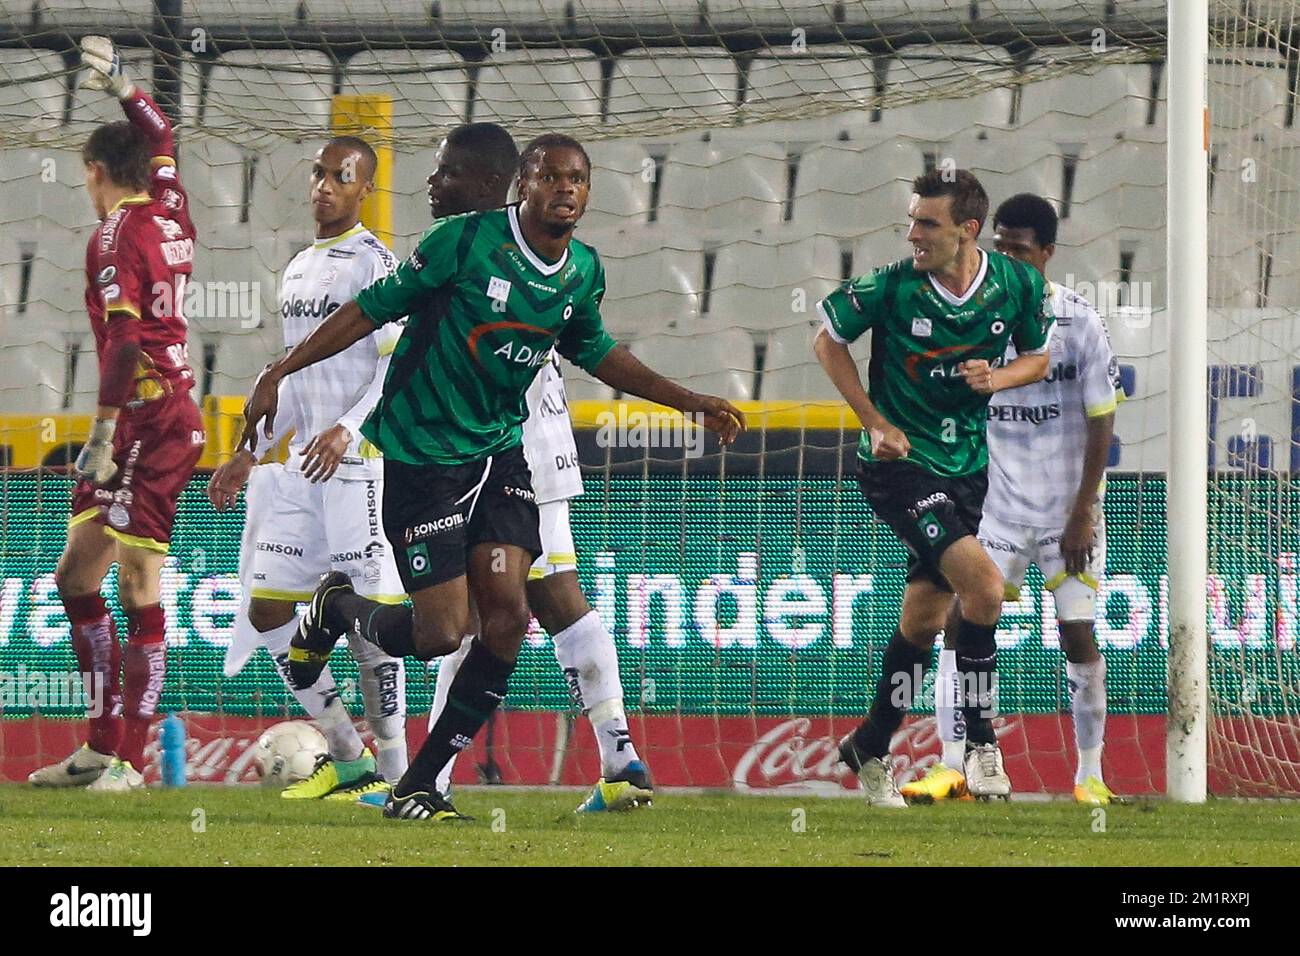 20131019 - BRUGGE, BELGIUM: Cercle's Michael Uchebo celebrates after scoring during the Jupiler Pro League match between Cercle Brugge and Zulte Waregem, in Brugge, Saturday 19 October 2013, on day 11 of the Belgian soccer championship. BELGA PHOTO BRUNO FAHY Stock Photo